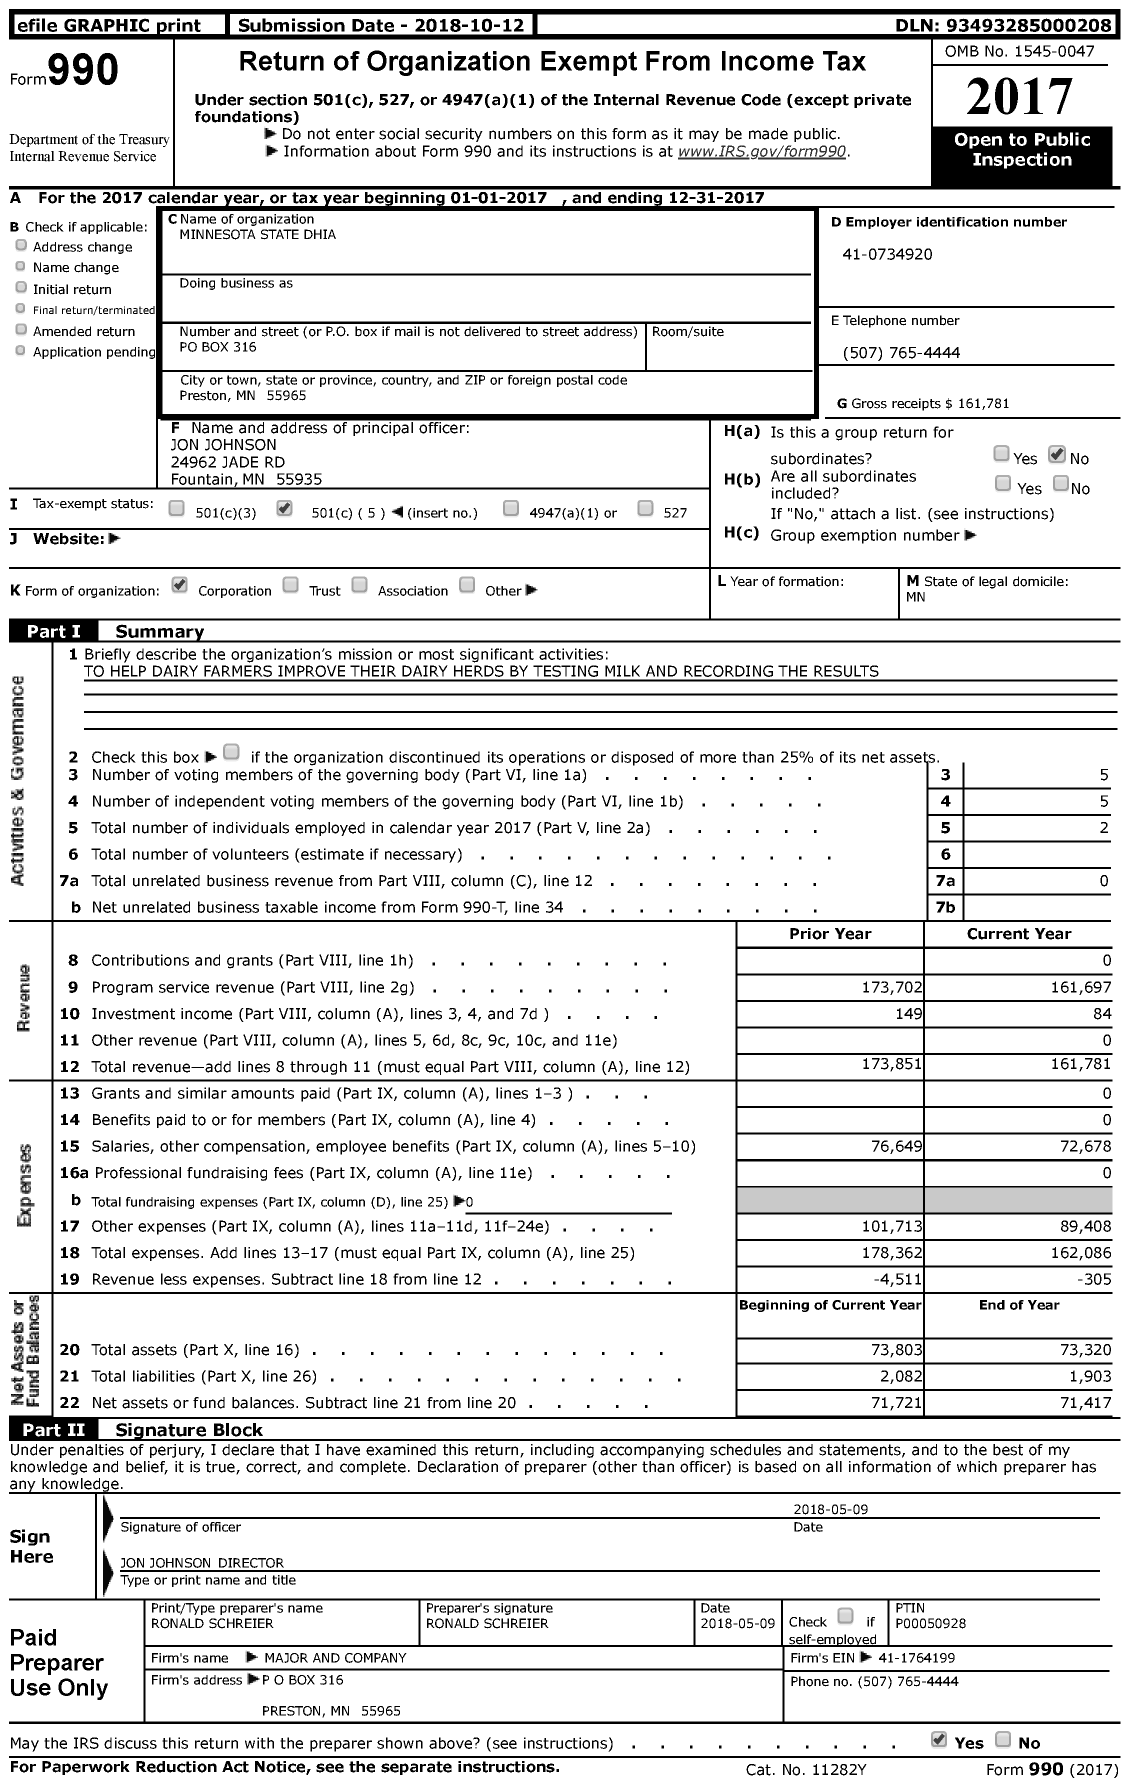 Image of first page of 2017 Form 990 for Minnesota State Dhia